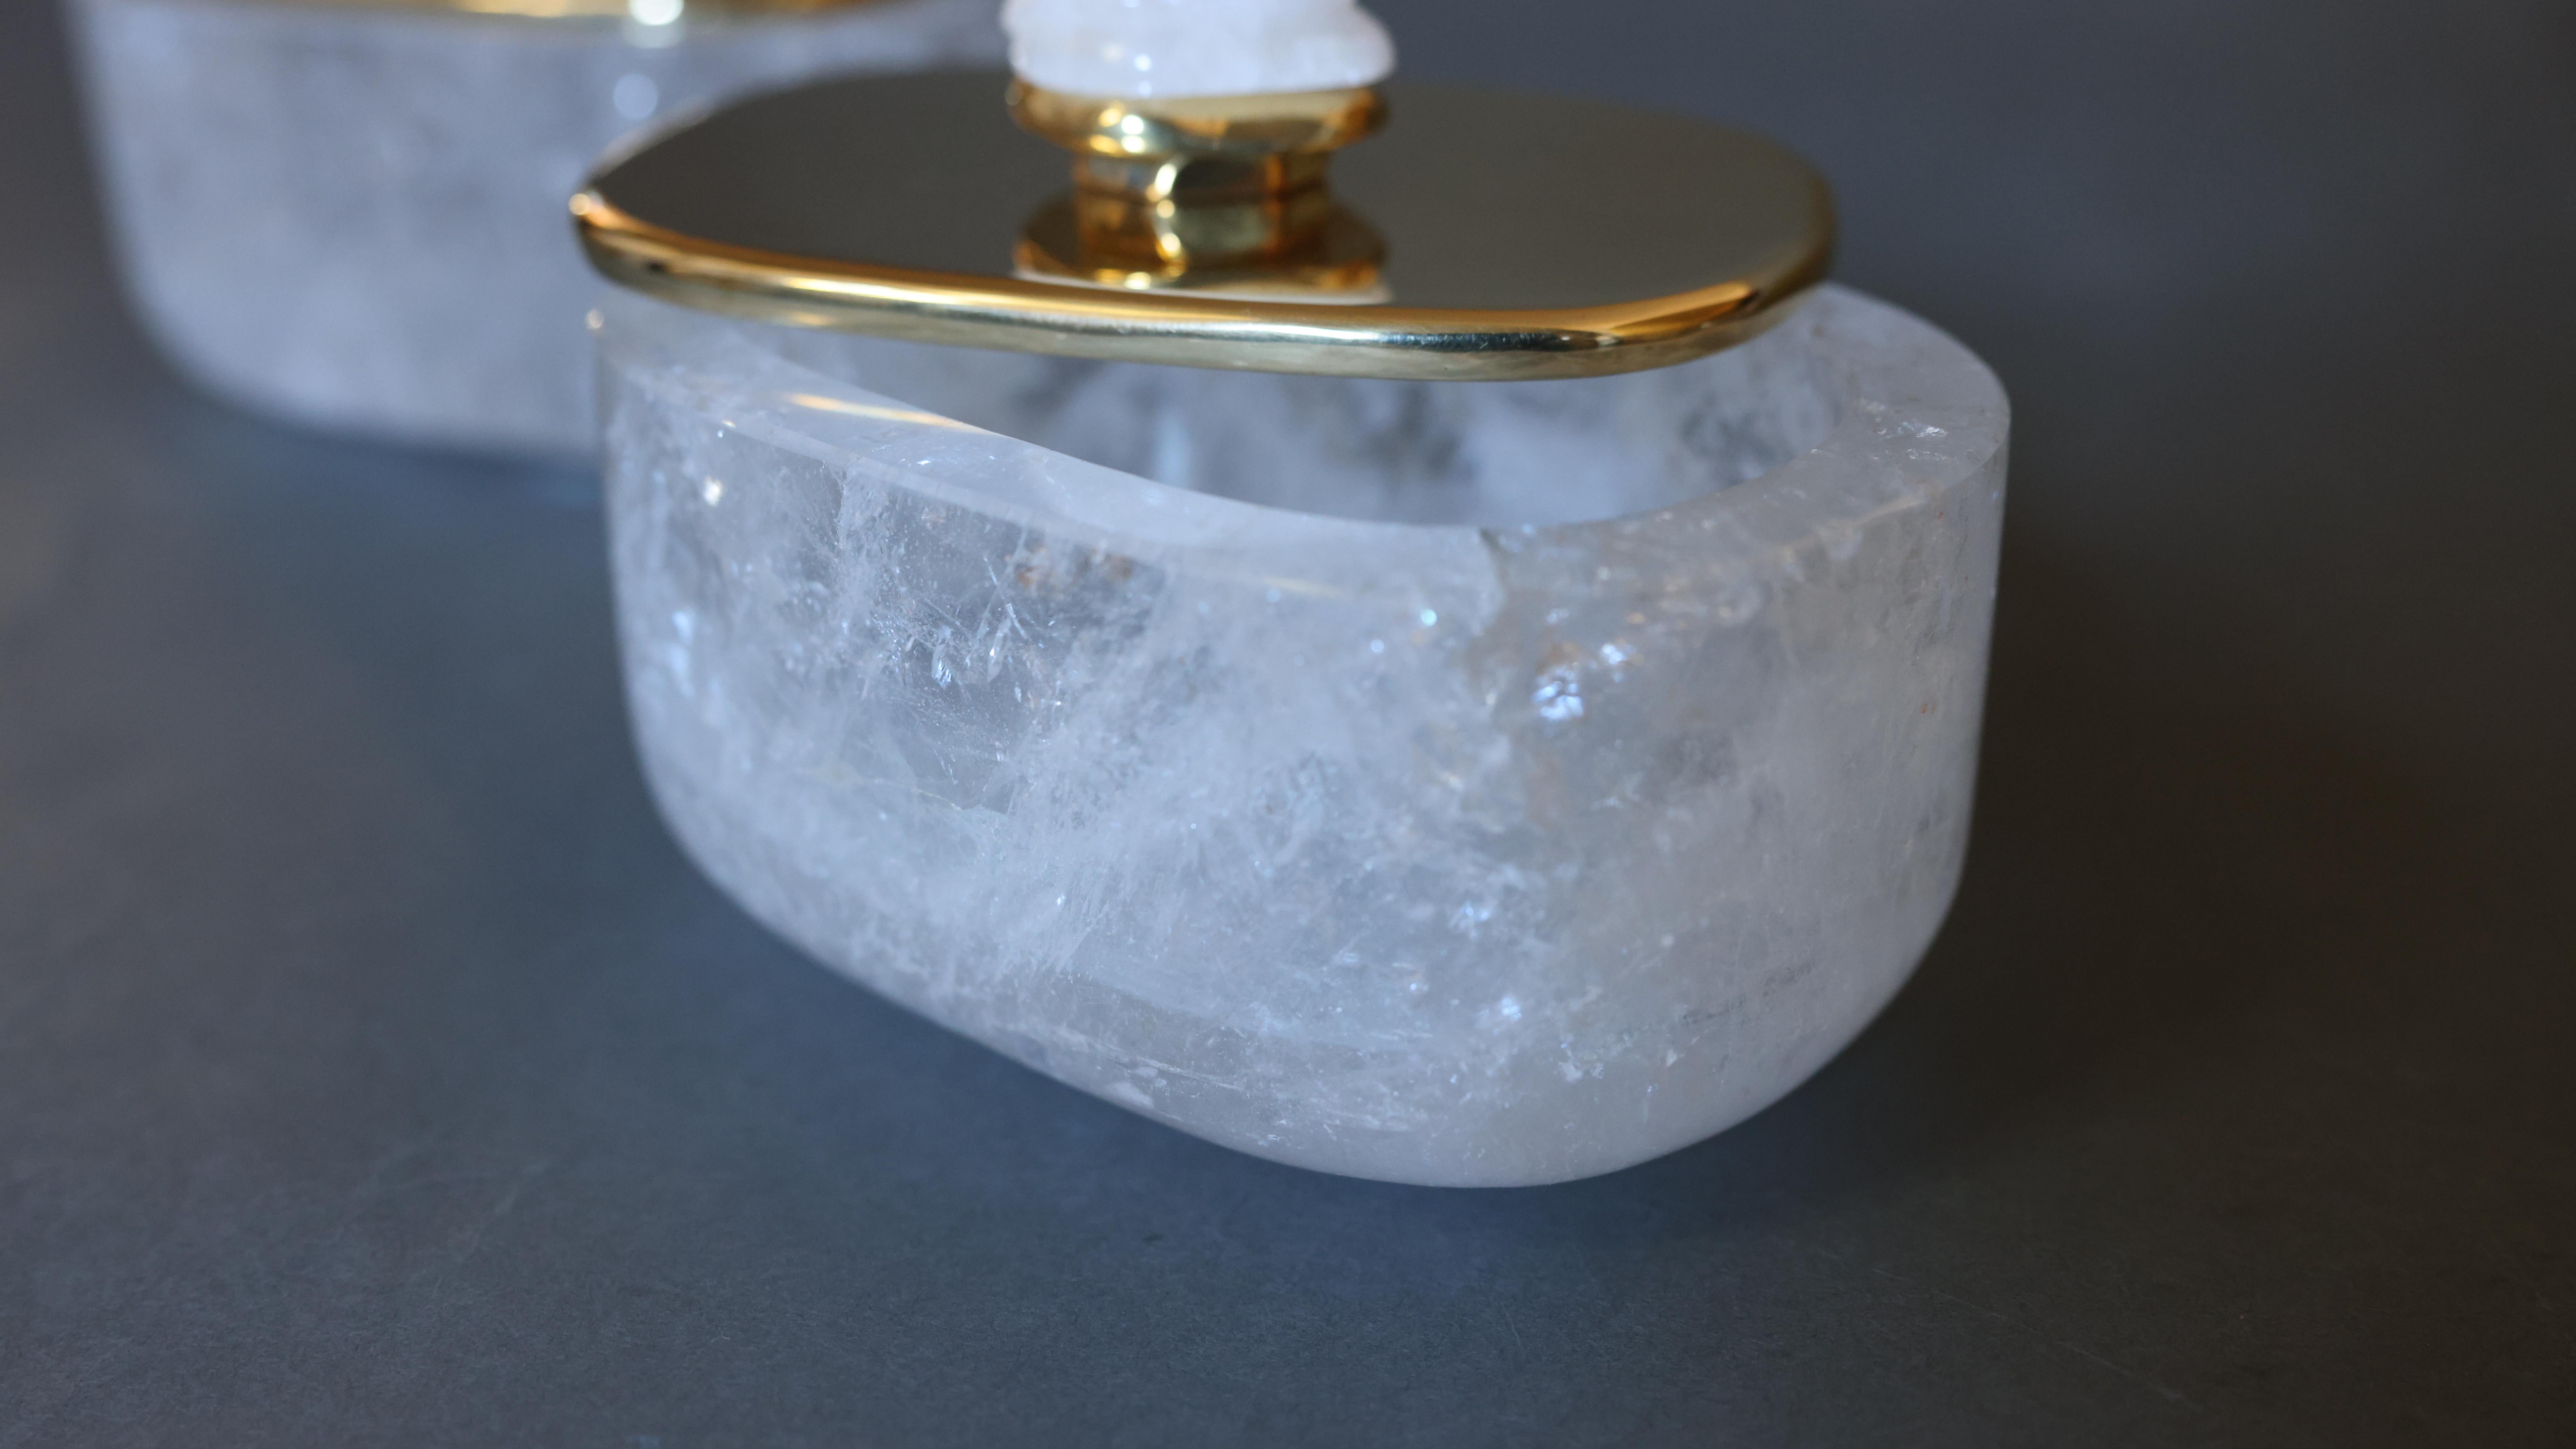 Pair of rock crystal boxes with polish brass covers,
Crated by Phoenix gallery, custom size and metal finish upon request.